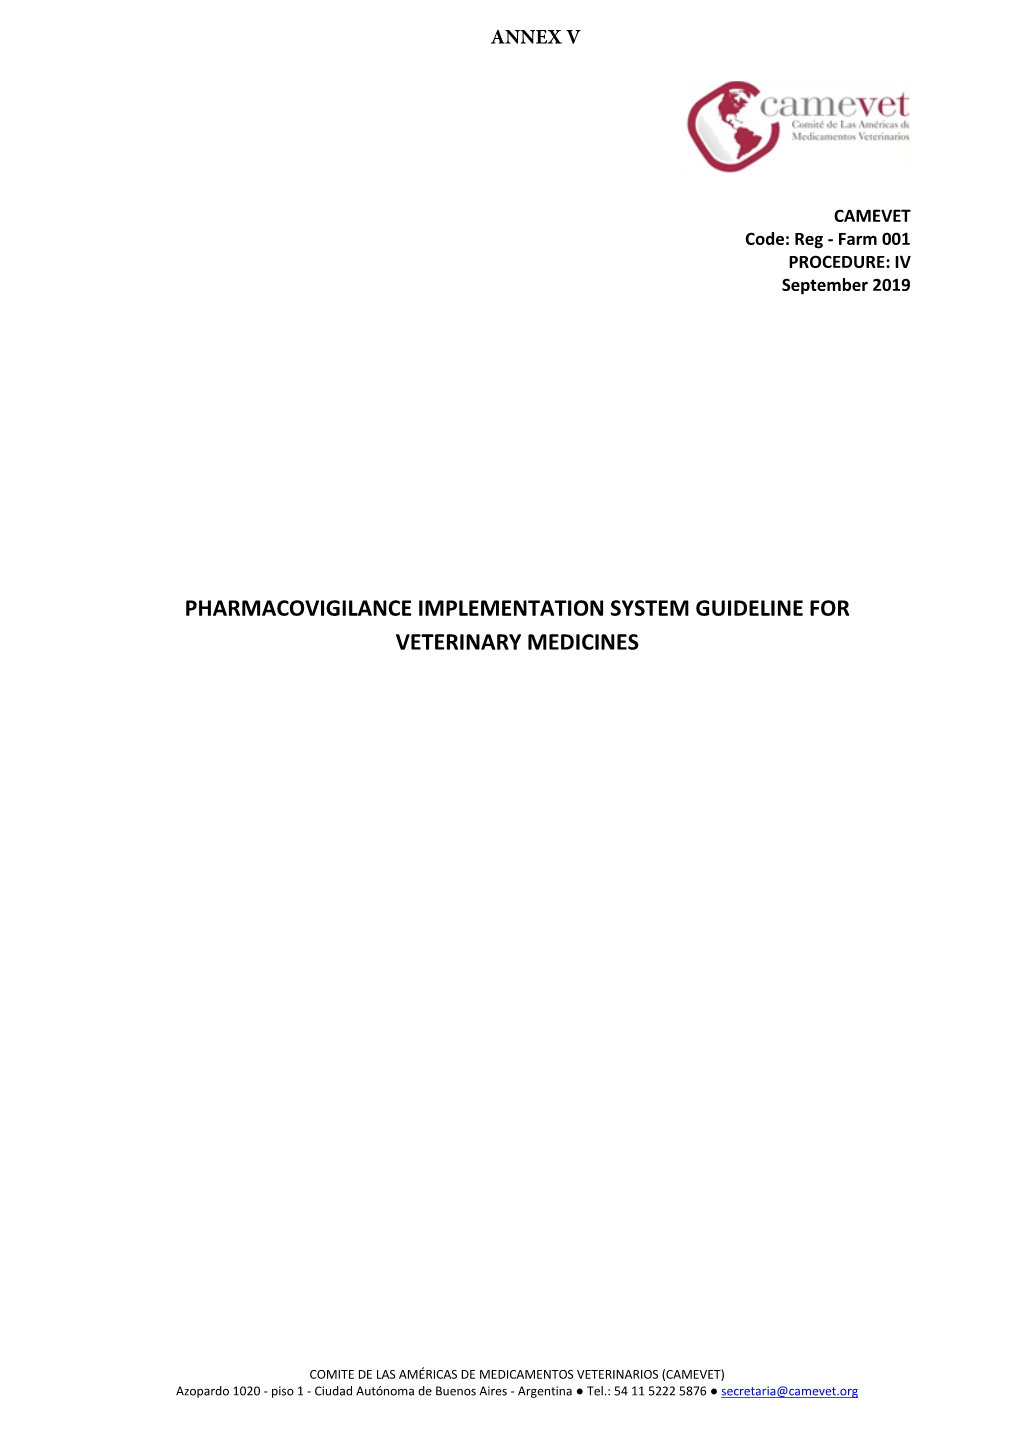 Pharmacovigilance Implementation System Guideline for Veterinary Medicines